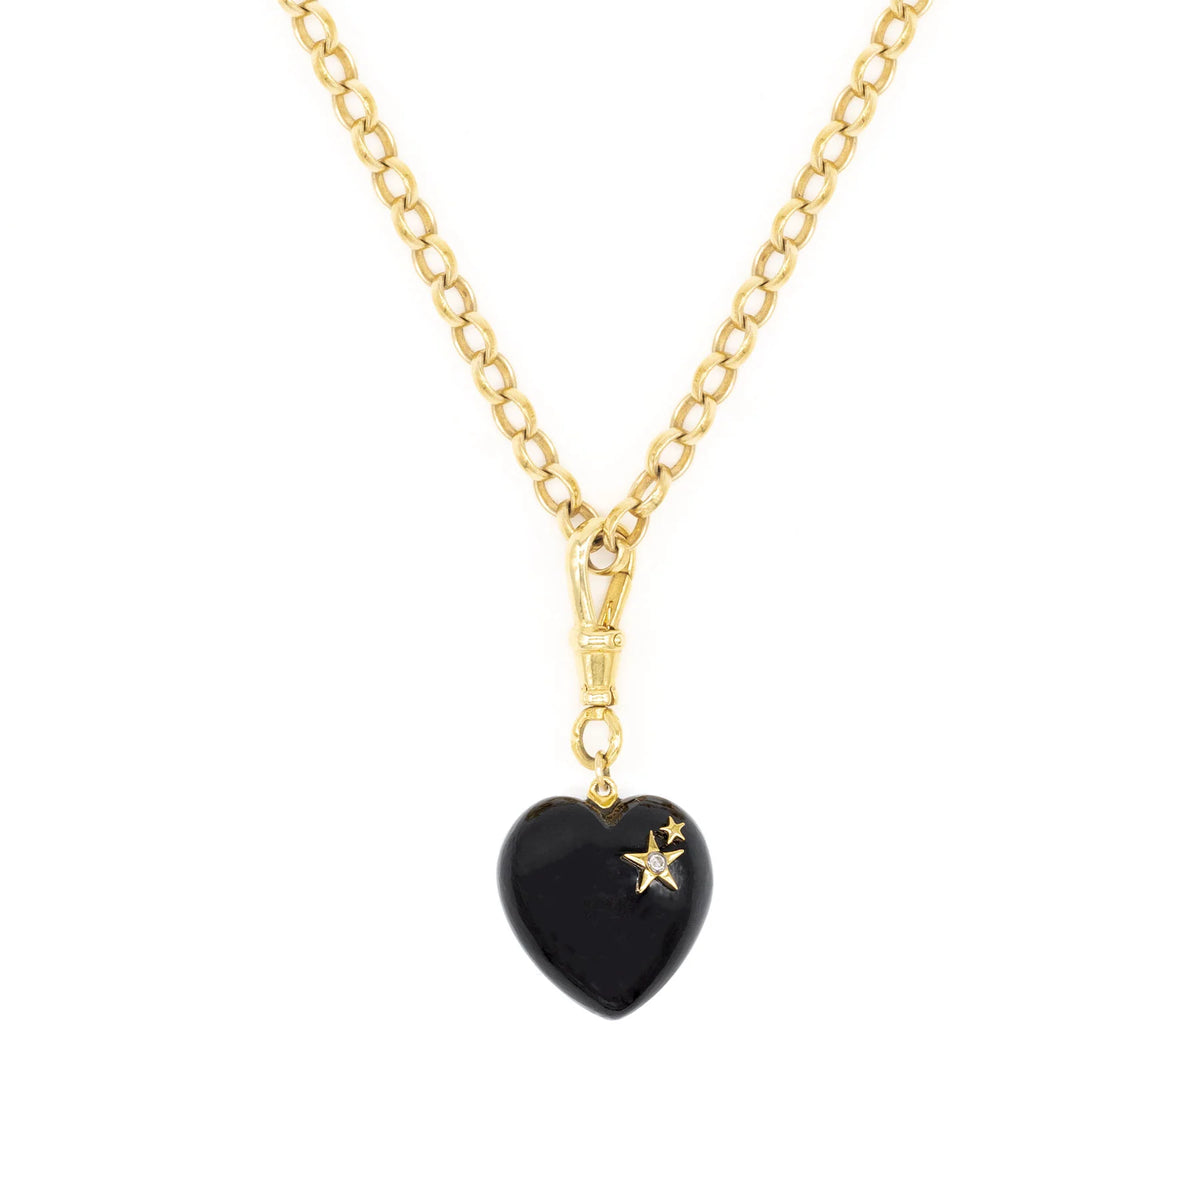 Black heart pendant with a diamond and star detail on a gold plated sterling sliver belcher chain